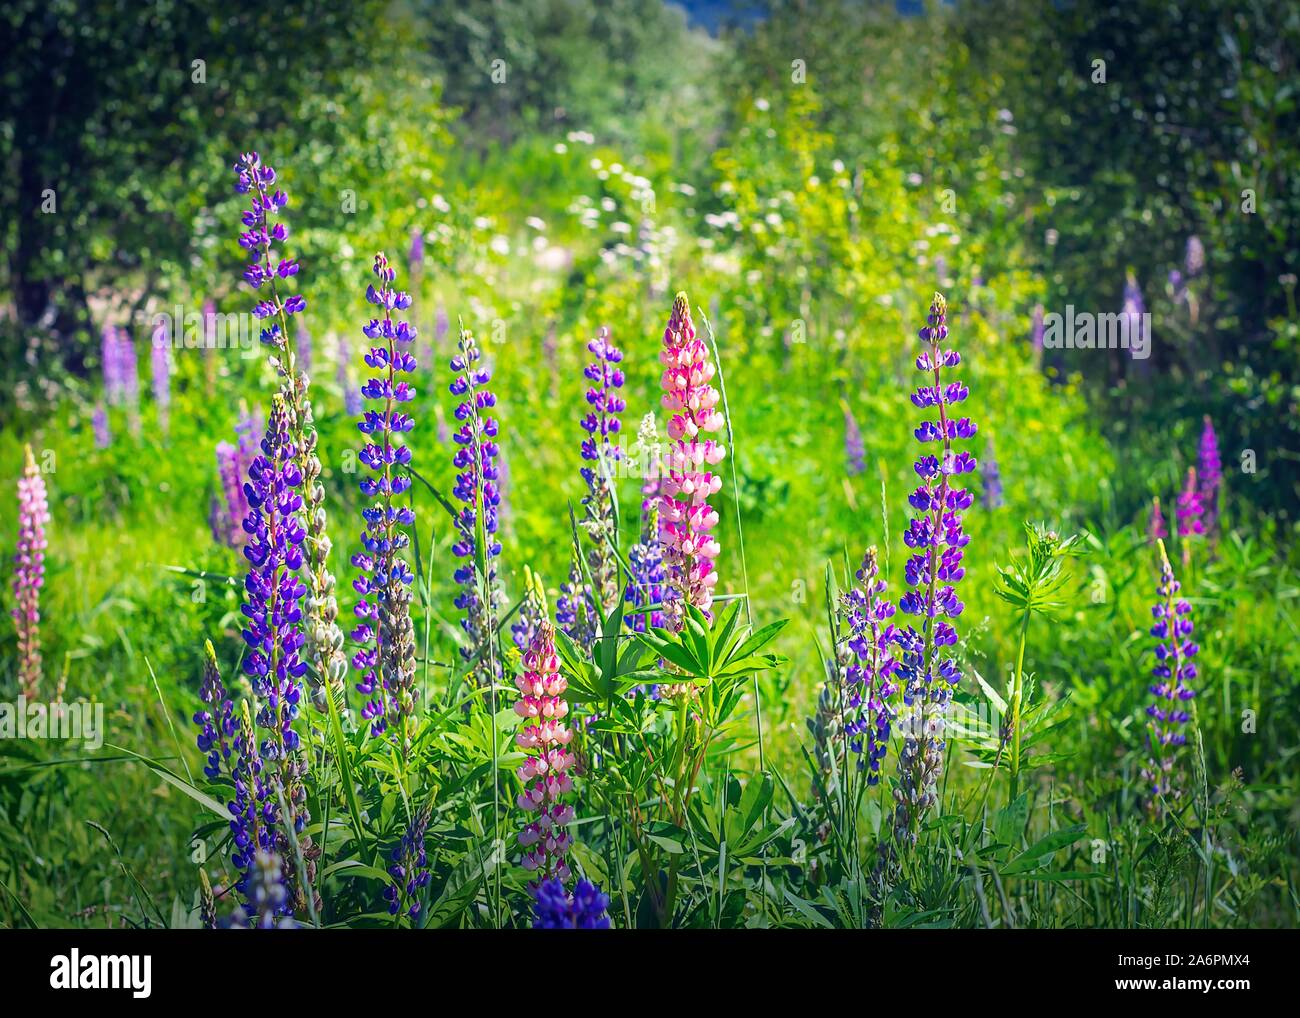 Upright Racemes of Blooming Purple and Pink Flowers of Fireweed or Willowherb, Chamaenerion Angustifolium, on a Sunny Summer Day. Stock Photo